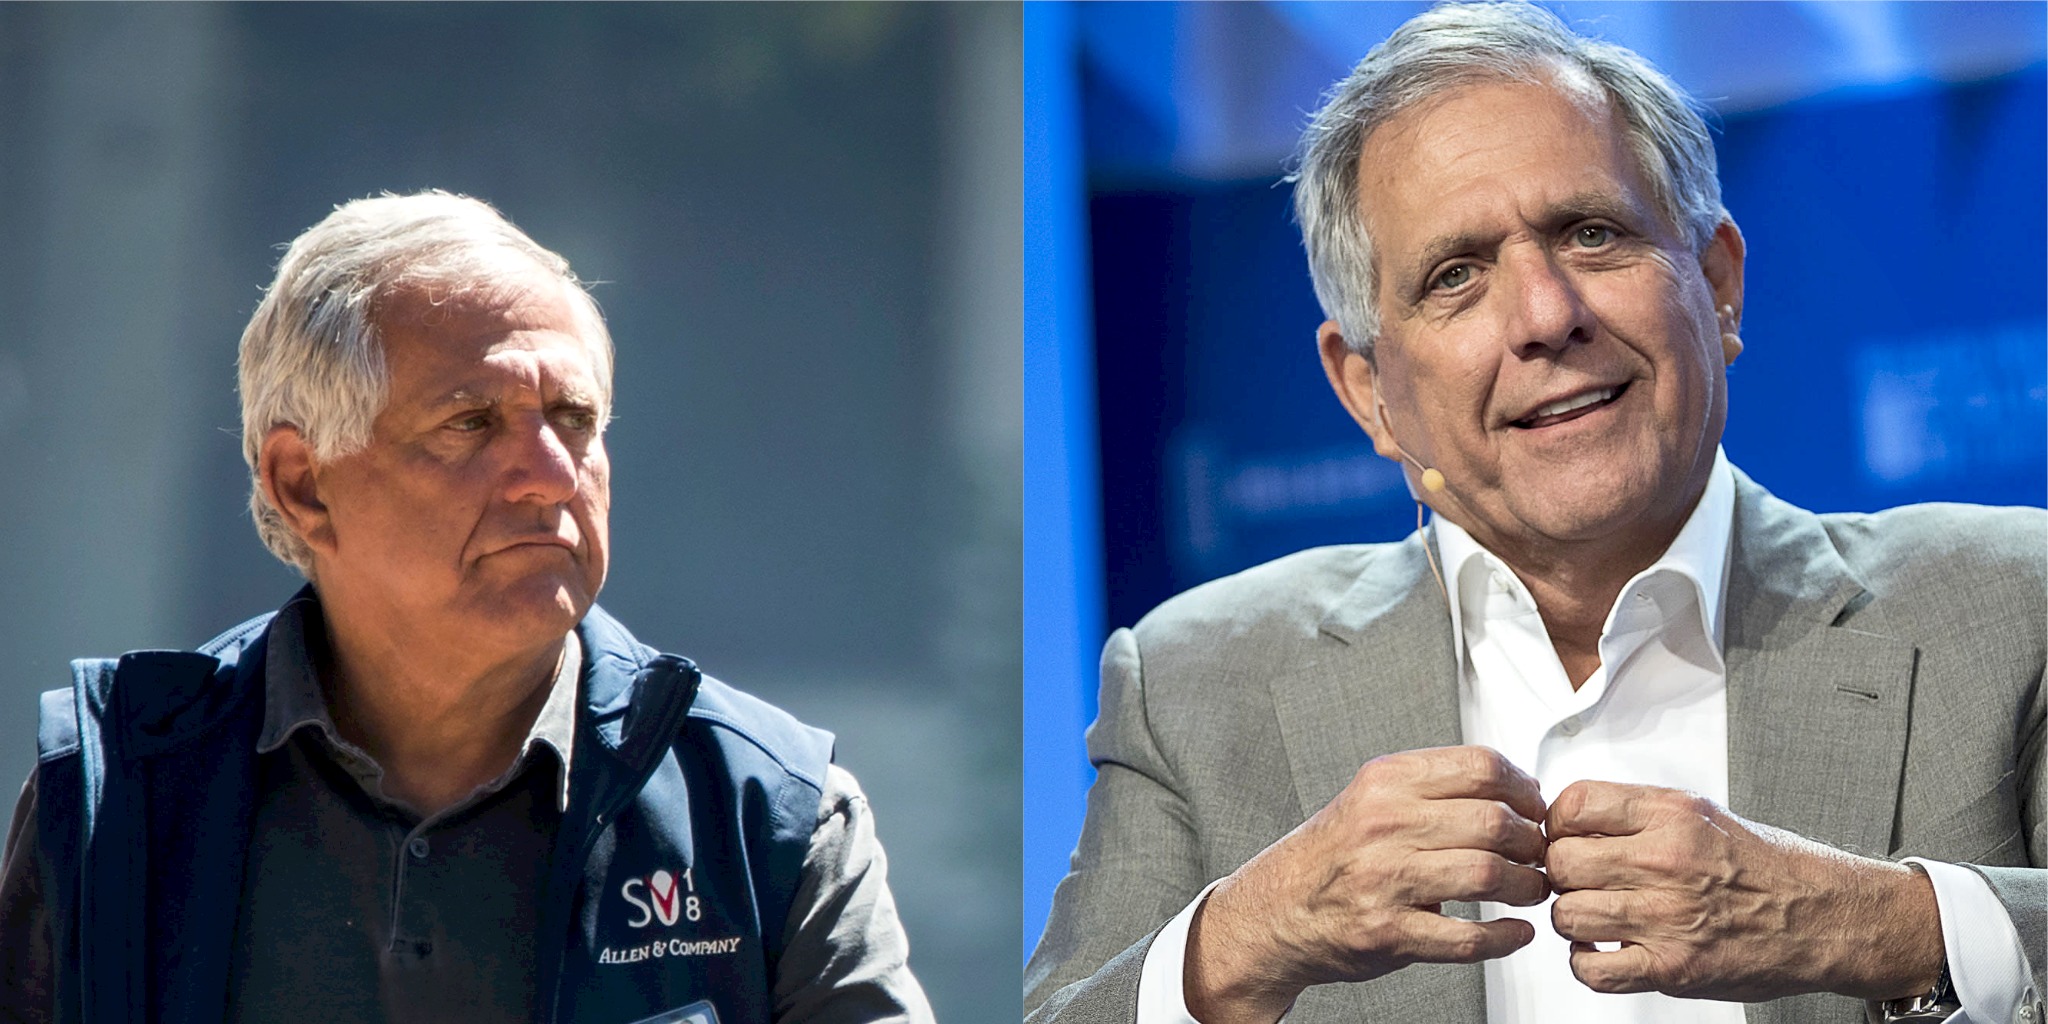 is-les-moonves-in-prison-former-cbs-executive-biography